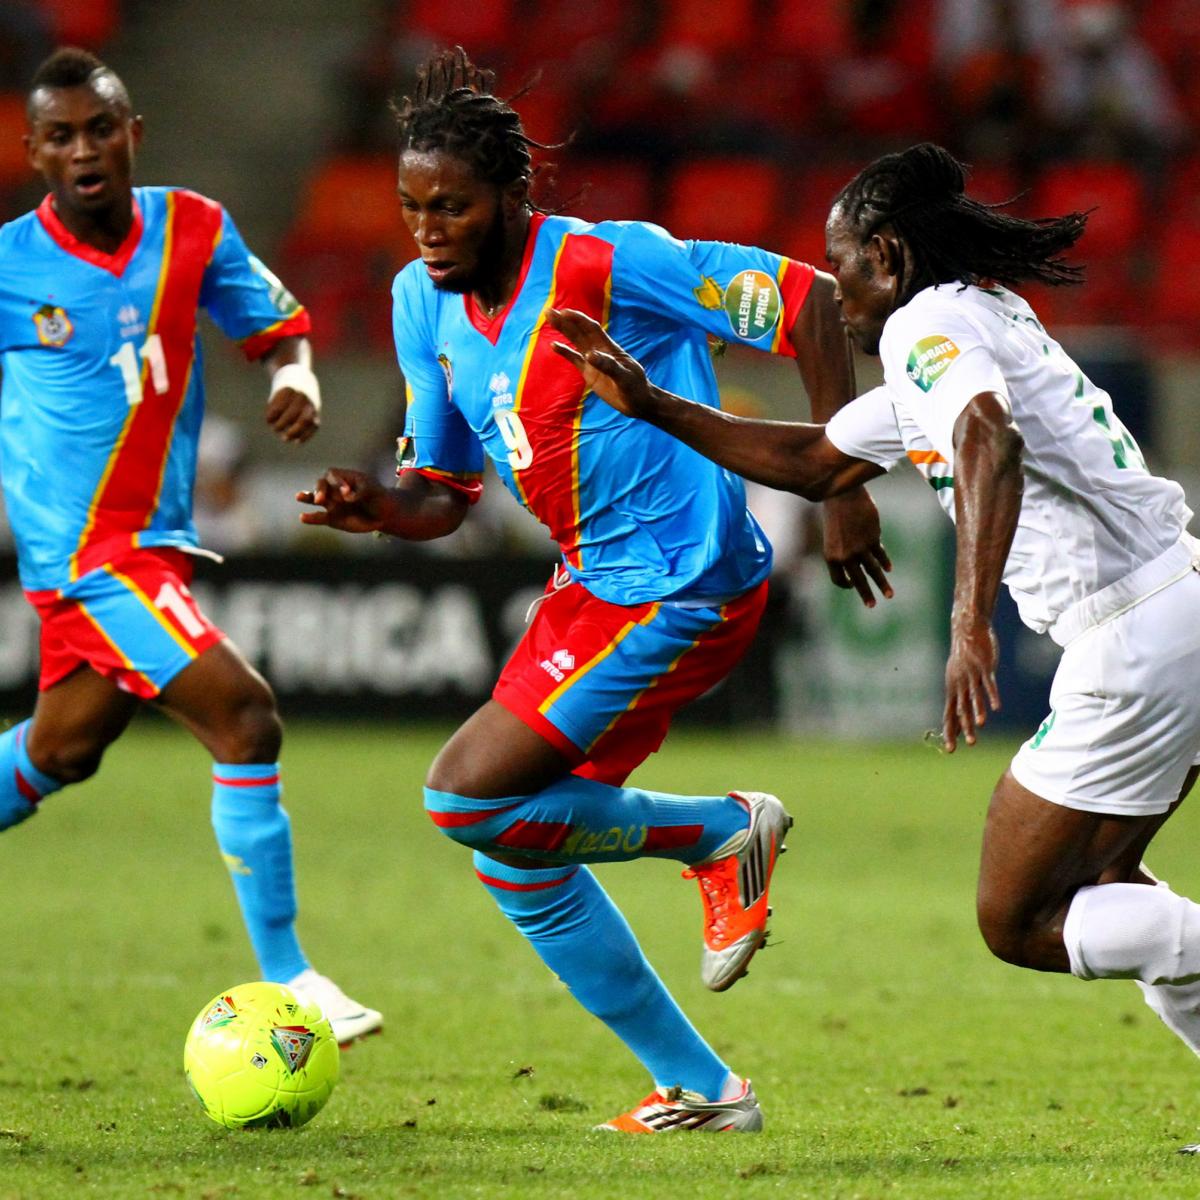 Africa Cup of Nations 2013 TV Schedule: Day 10 Live Stream Info and